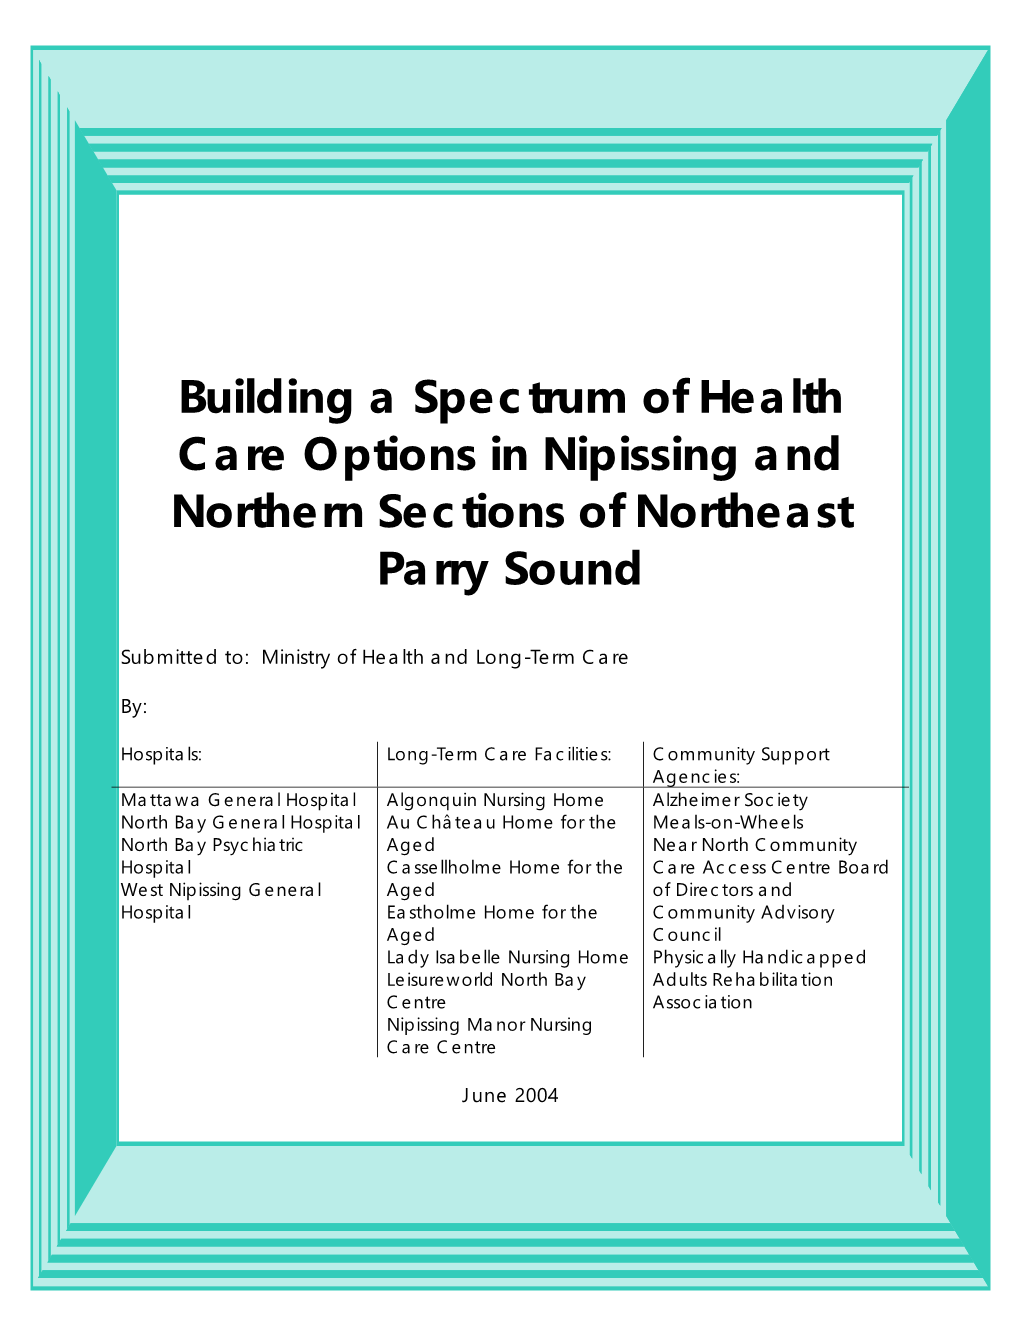 Building a Spectrum of Health Care Options in Nipissing and Northern Sections of Northeast Parry Sound